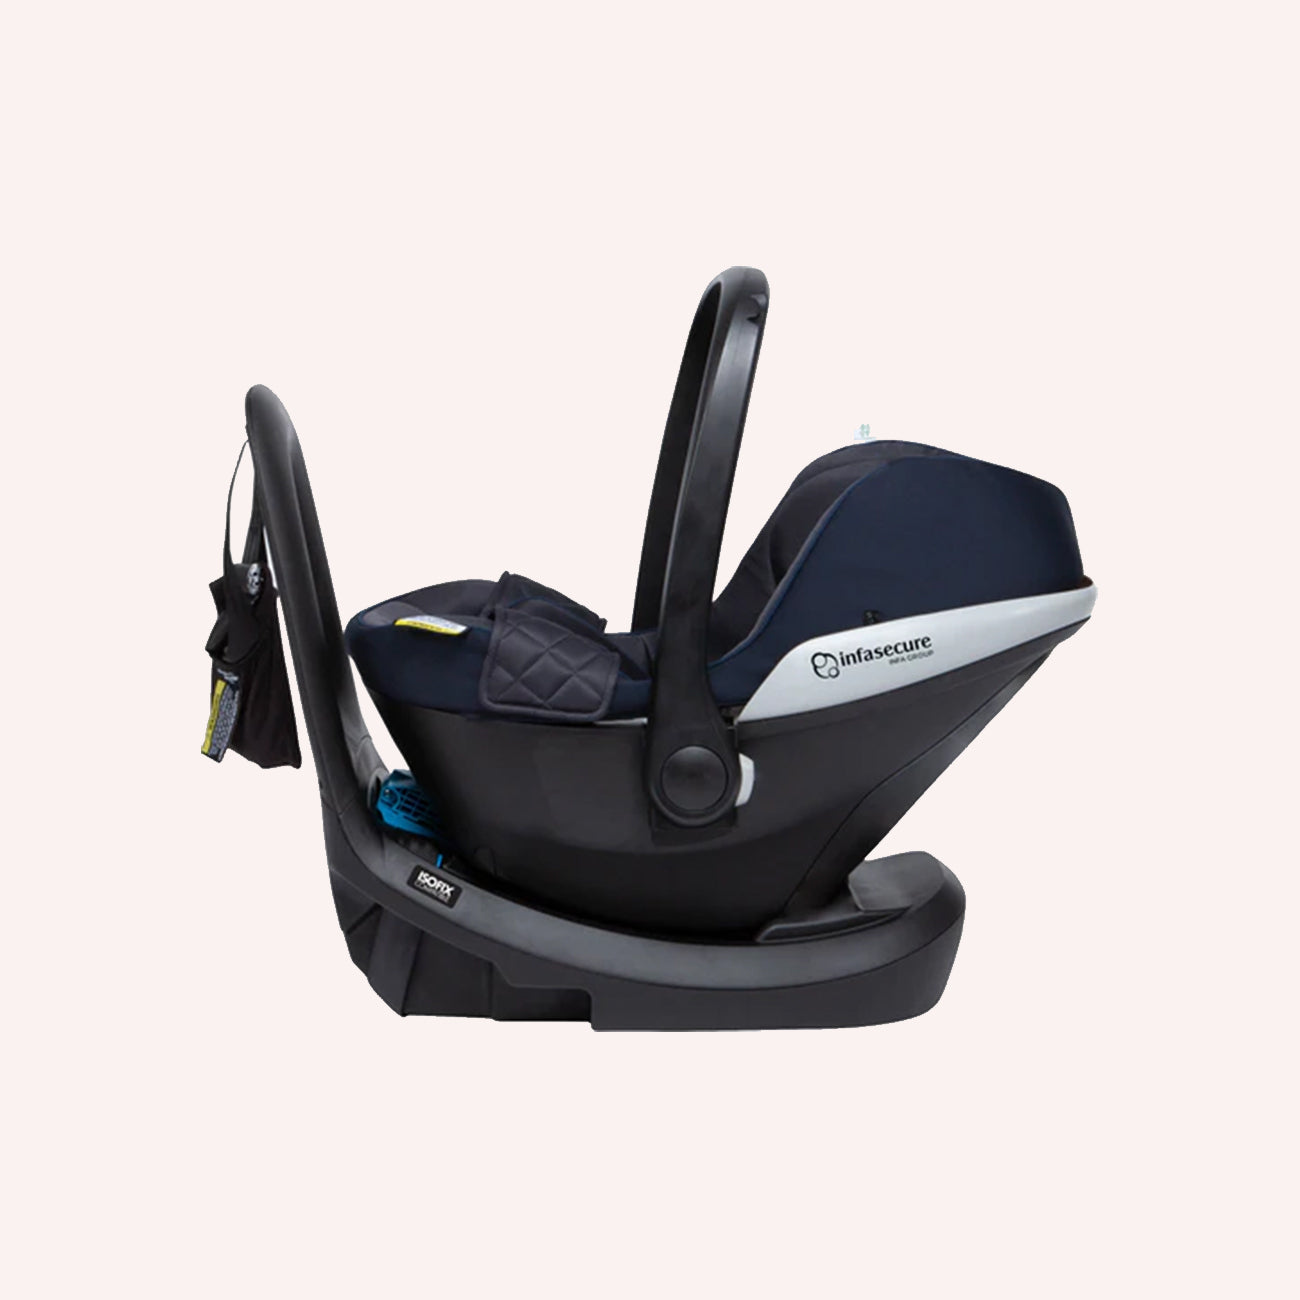 Adapt More Infant Carrier -  0-6 Months (2013) - Midnight Blue